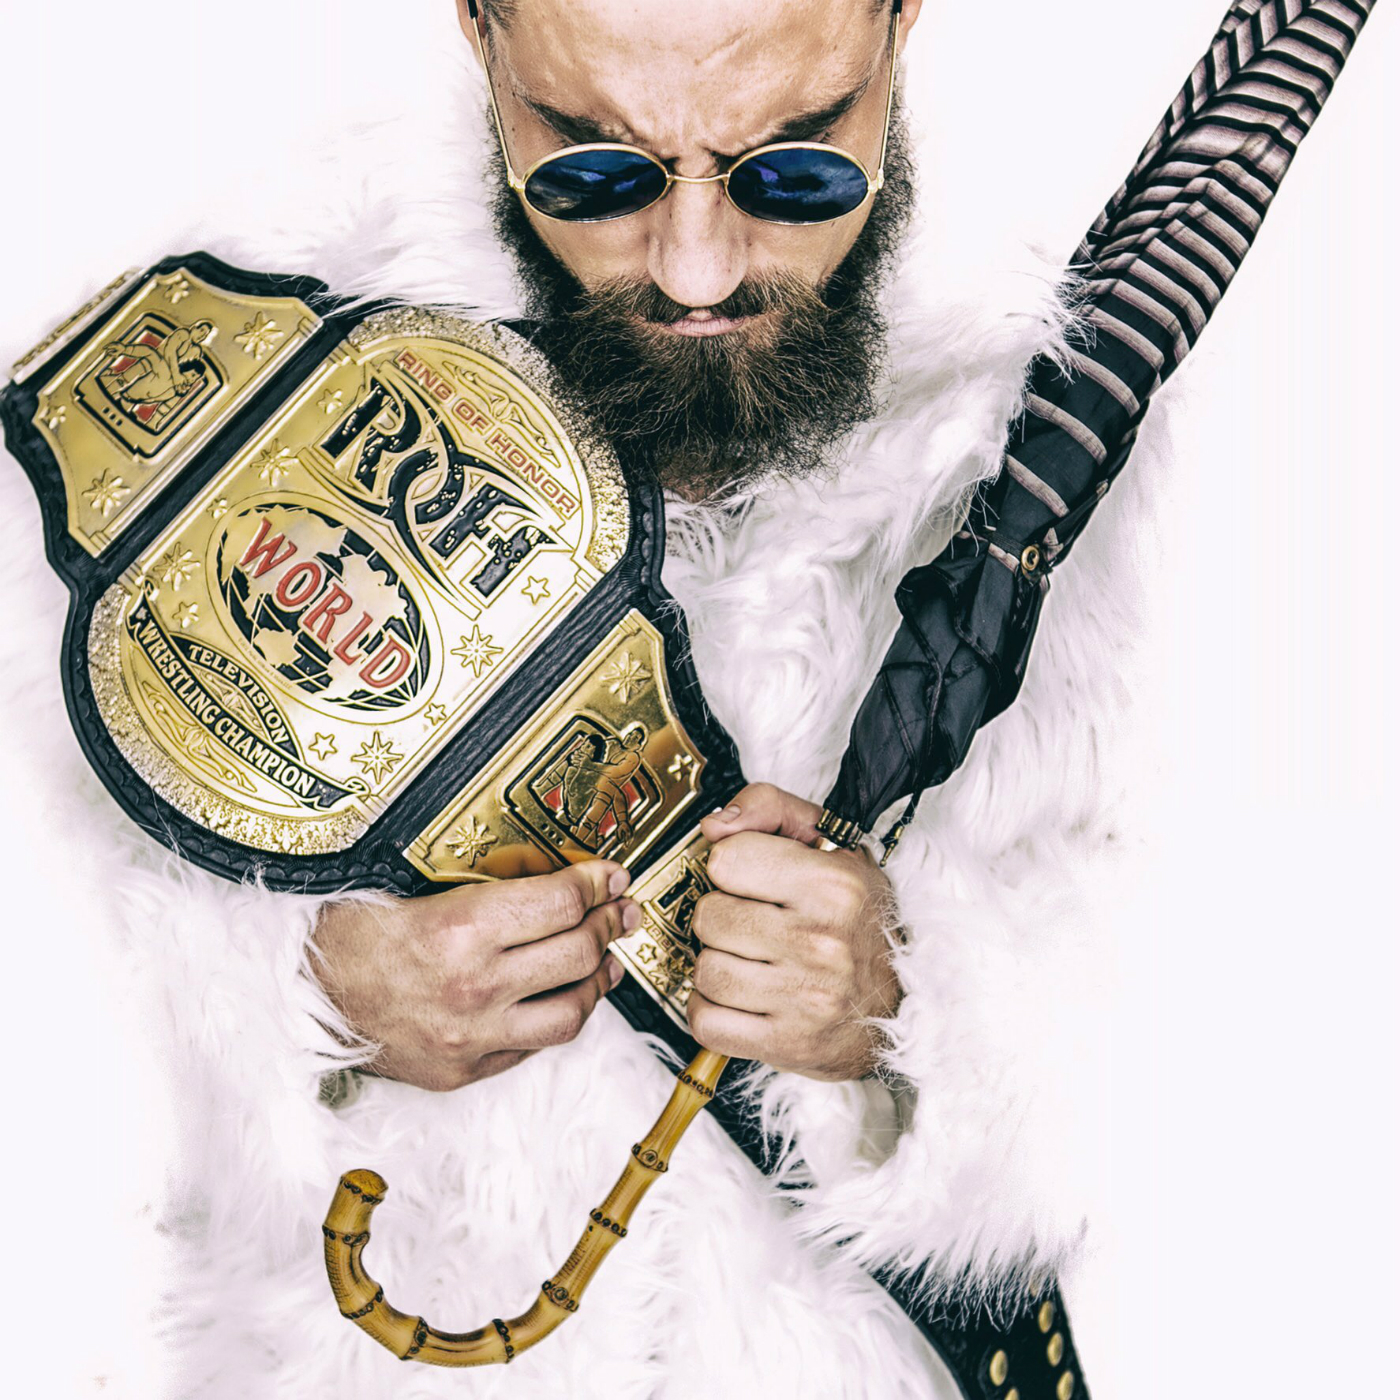 Marty Scurll Discusses the “Villain”, UK Championship, BOLA, SI, & More